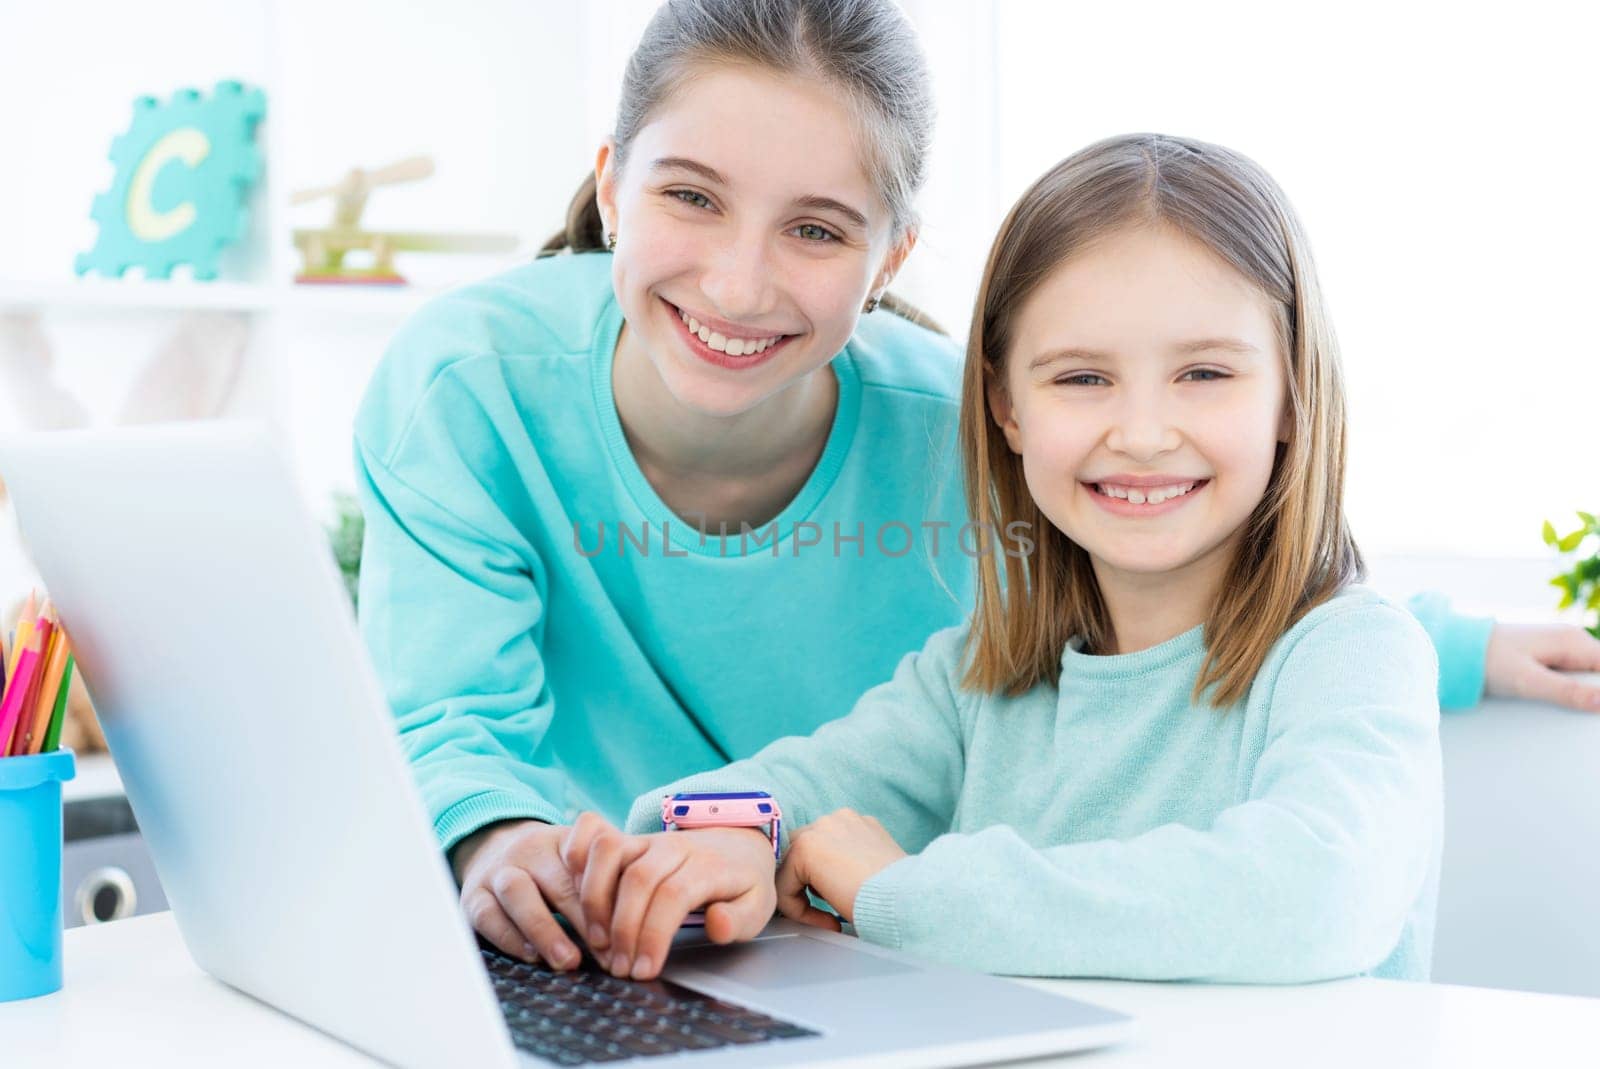 Smiling sisters next to modern laptop in light room